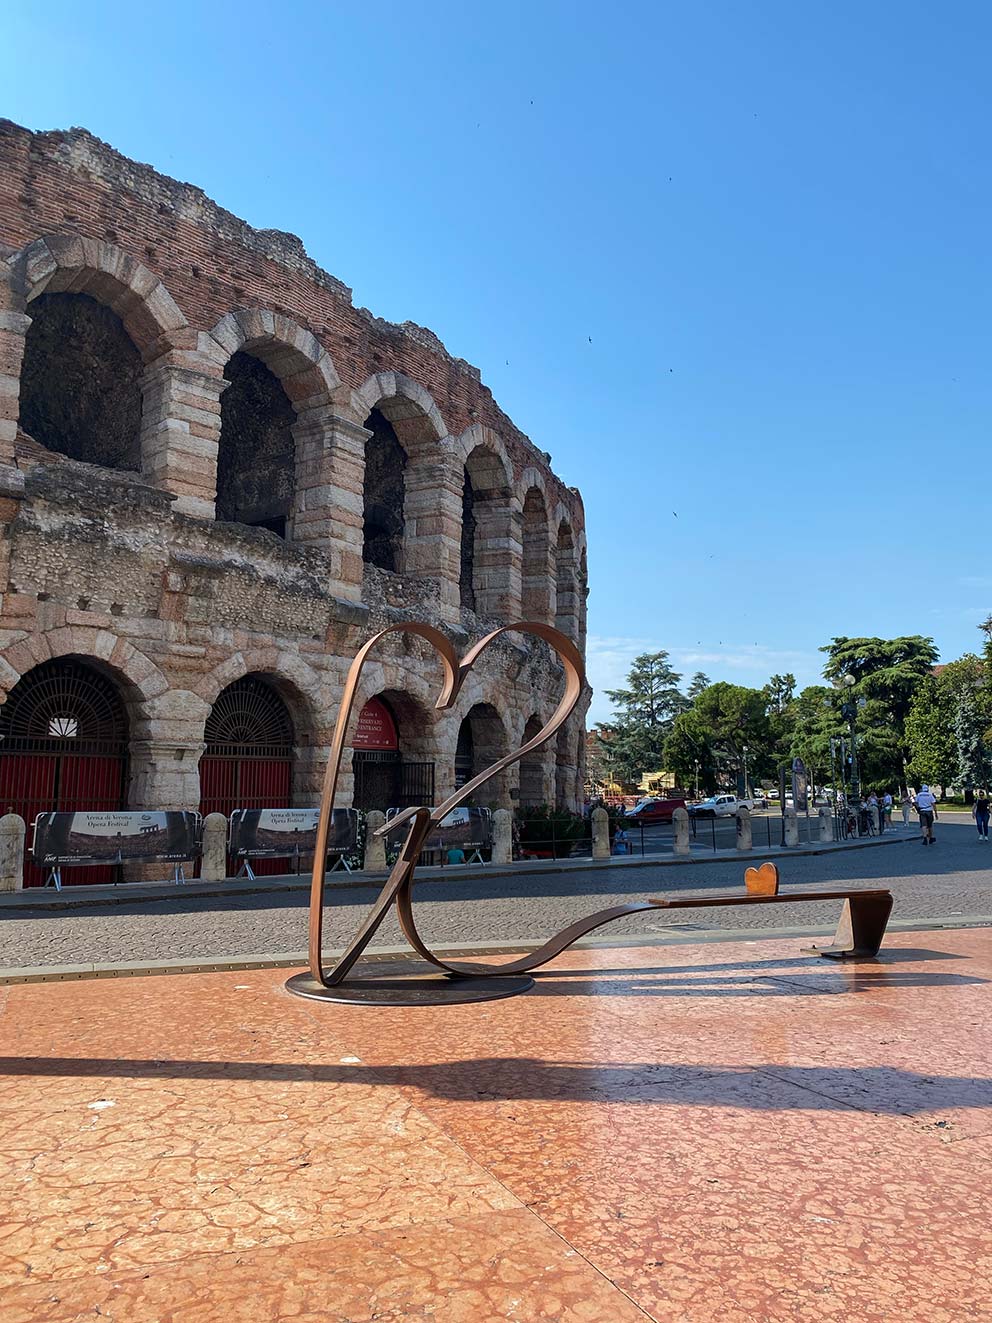 The Verona Arena: A Storied Legacy in Stone